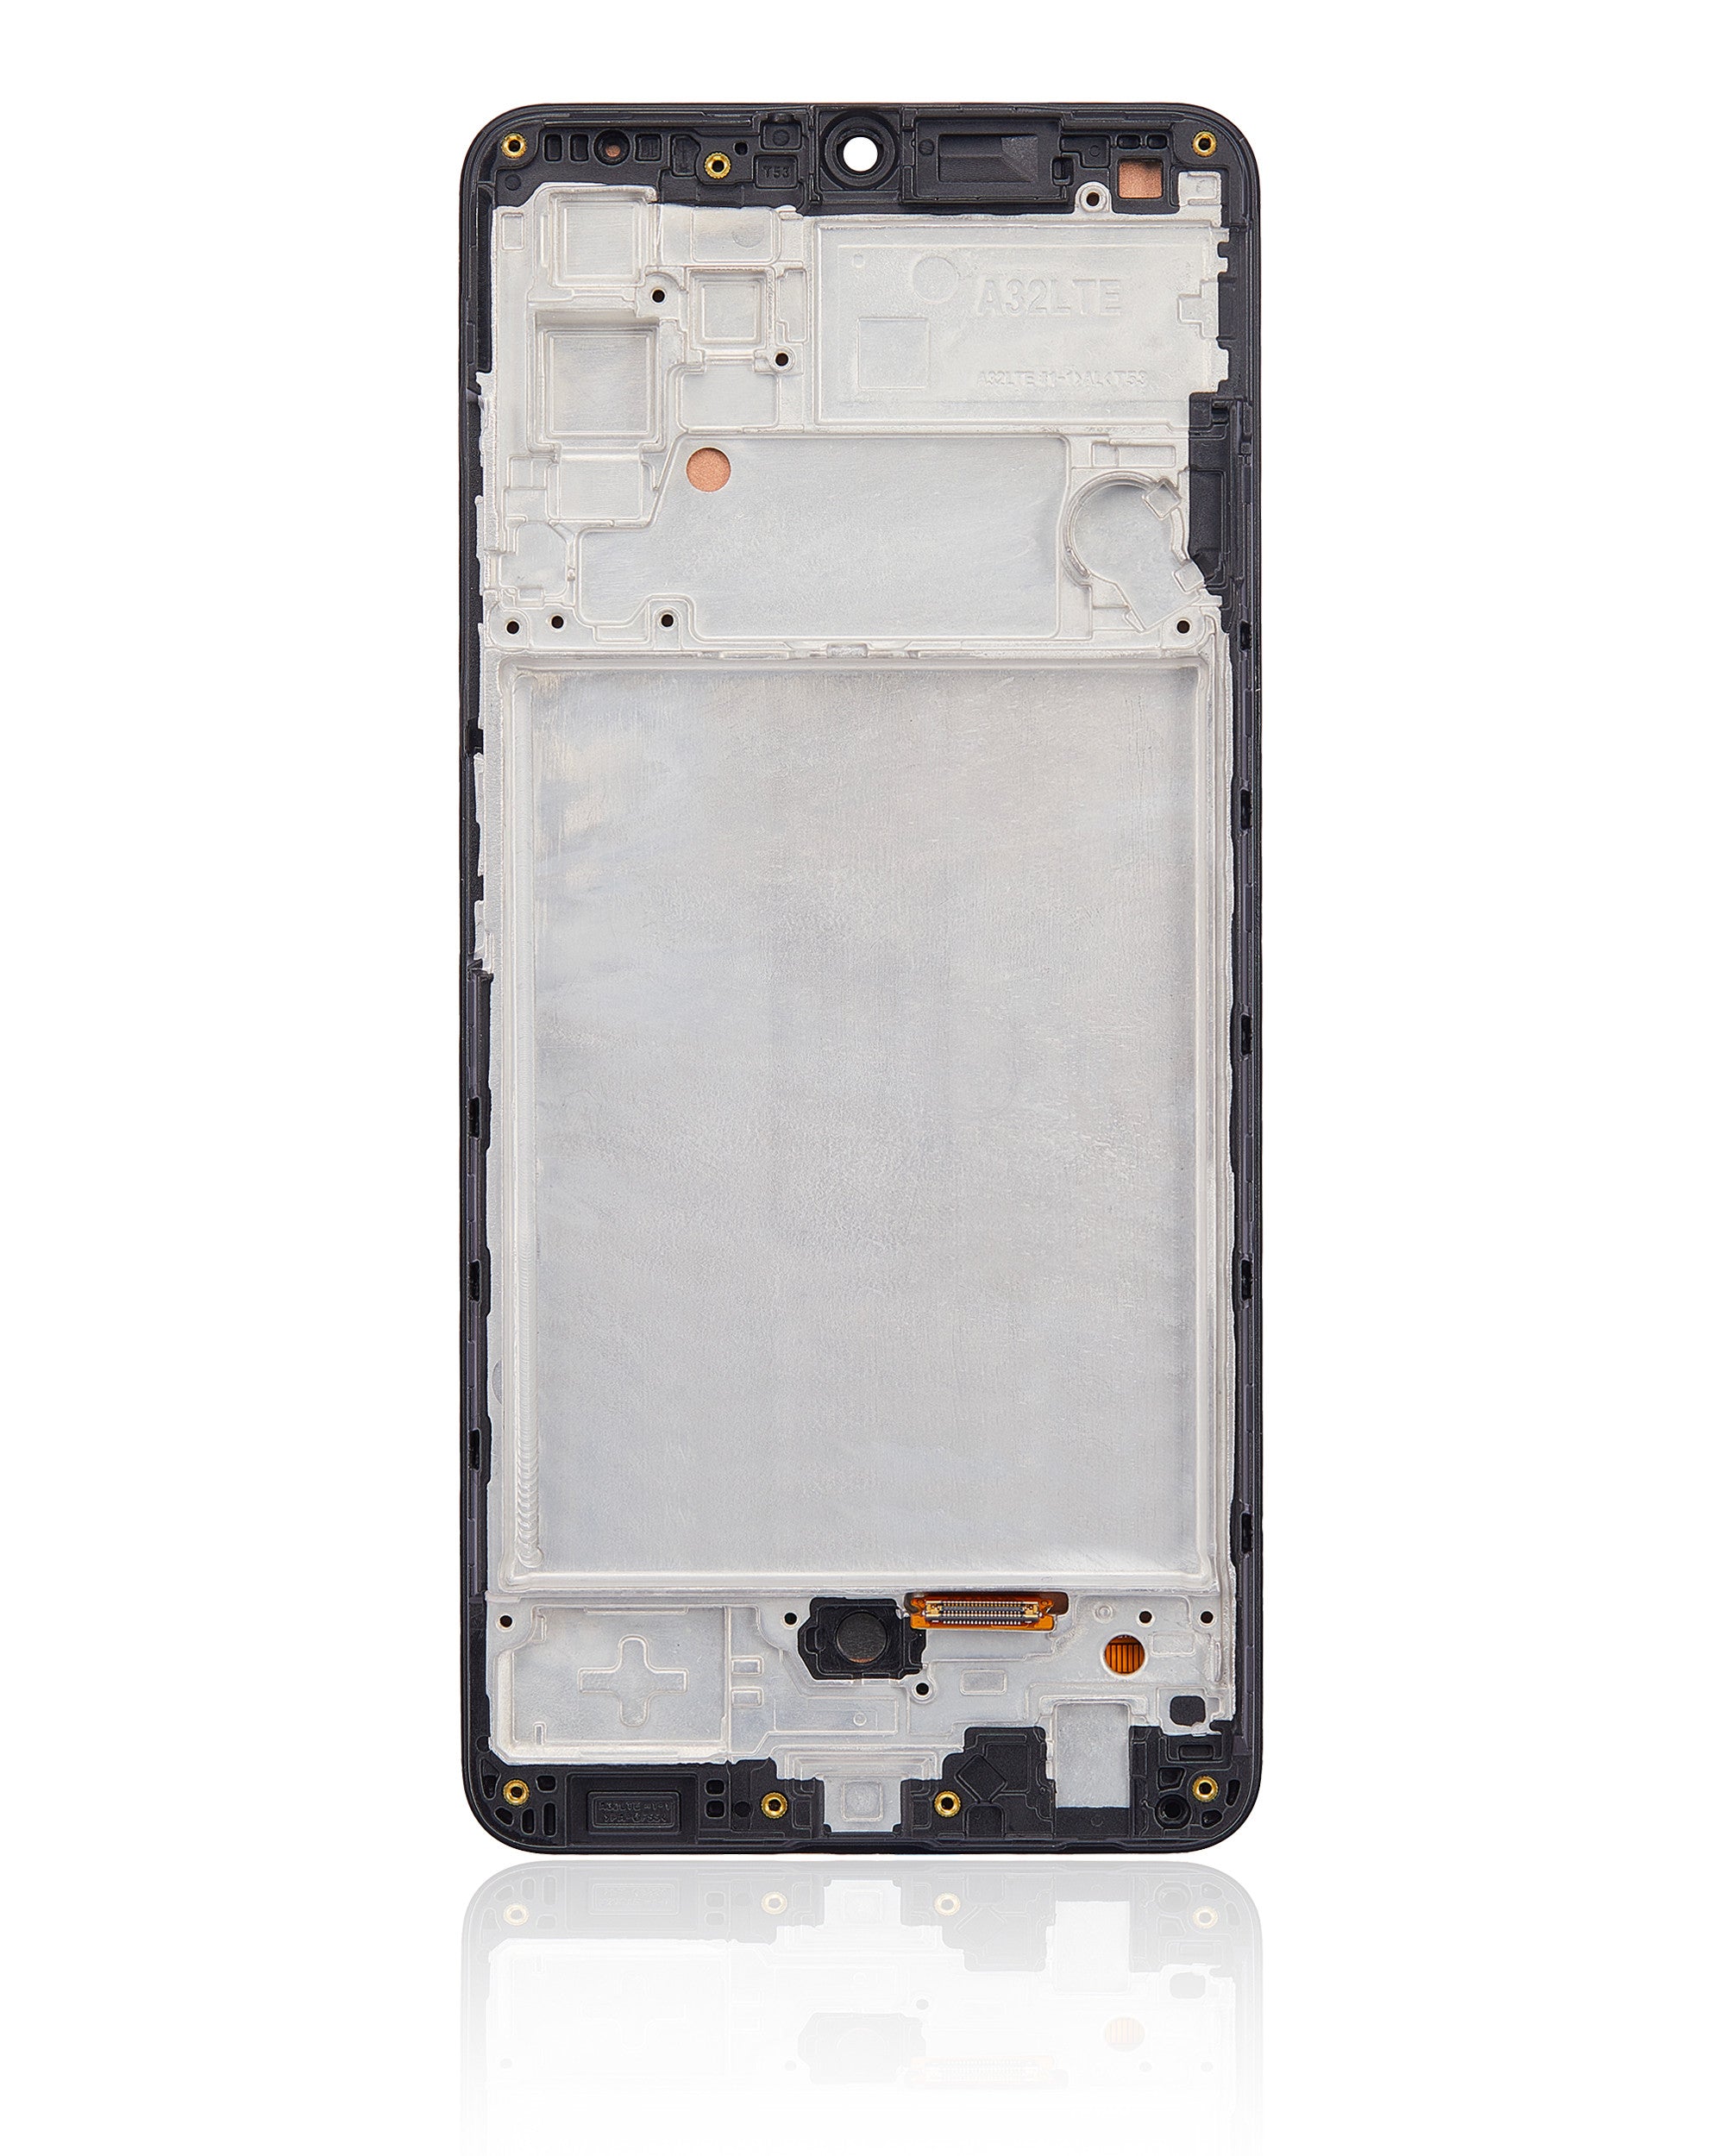 For Samsung Galaxy A32 4G (A325 / 2021) LCD Screen Replacement With Frame (Aftermarket Pro) (All Colors)